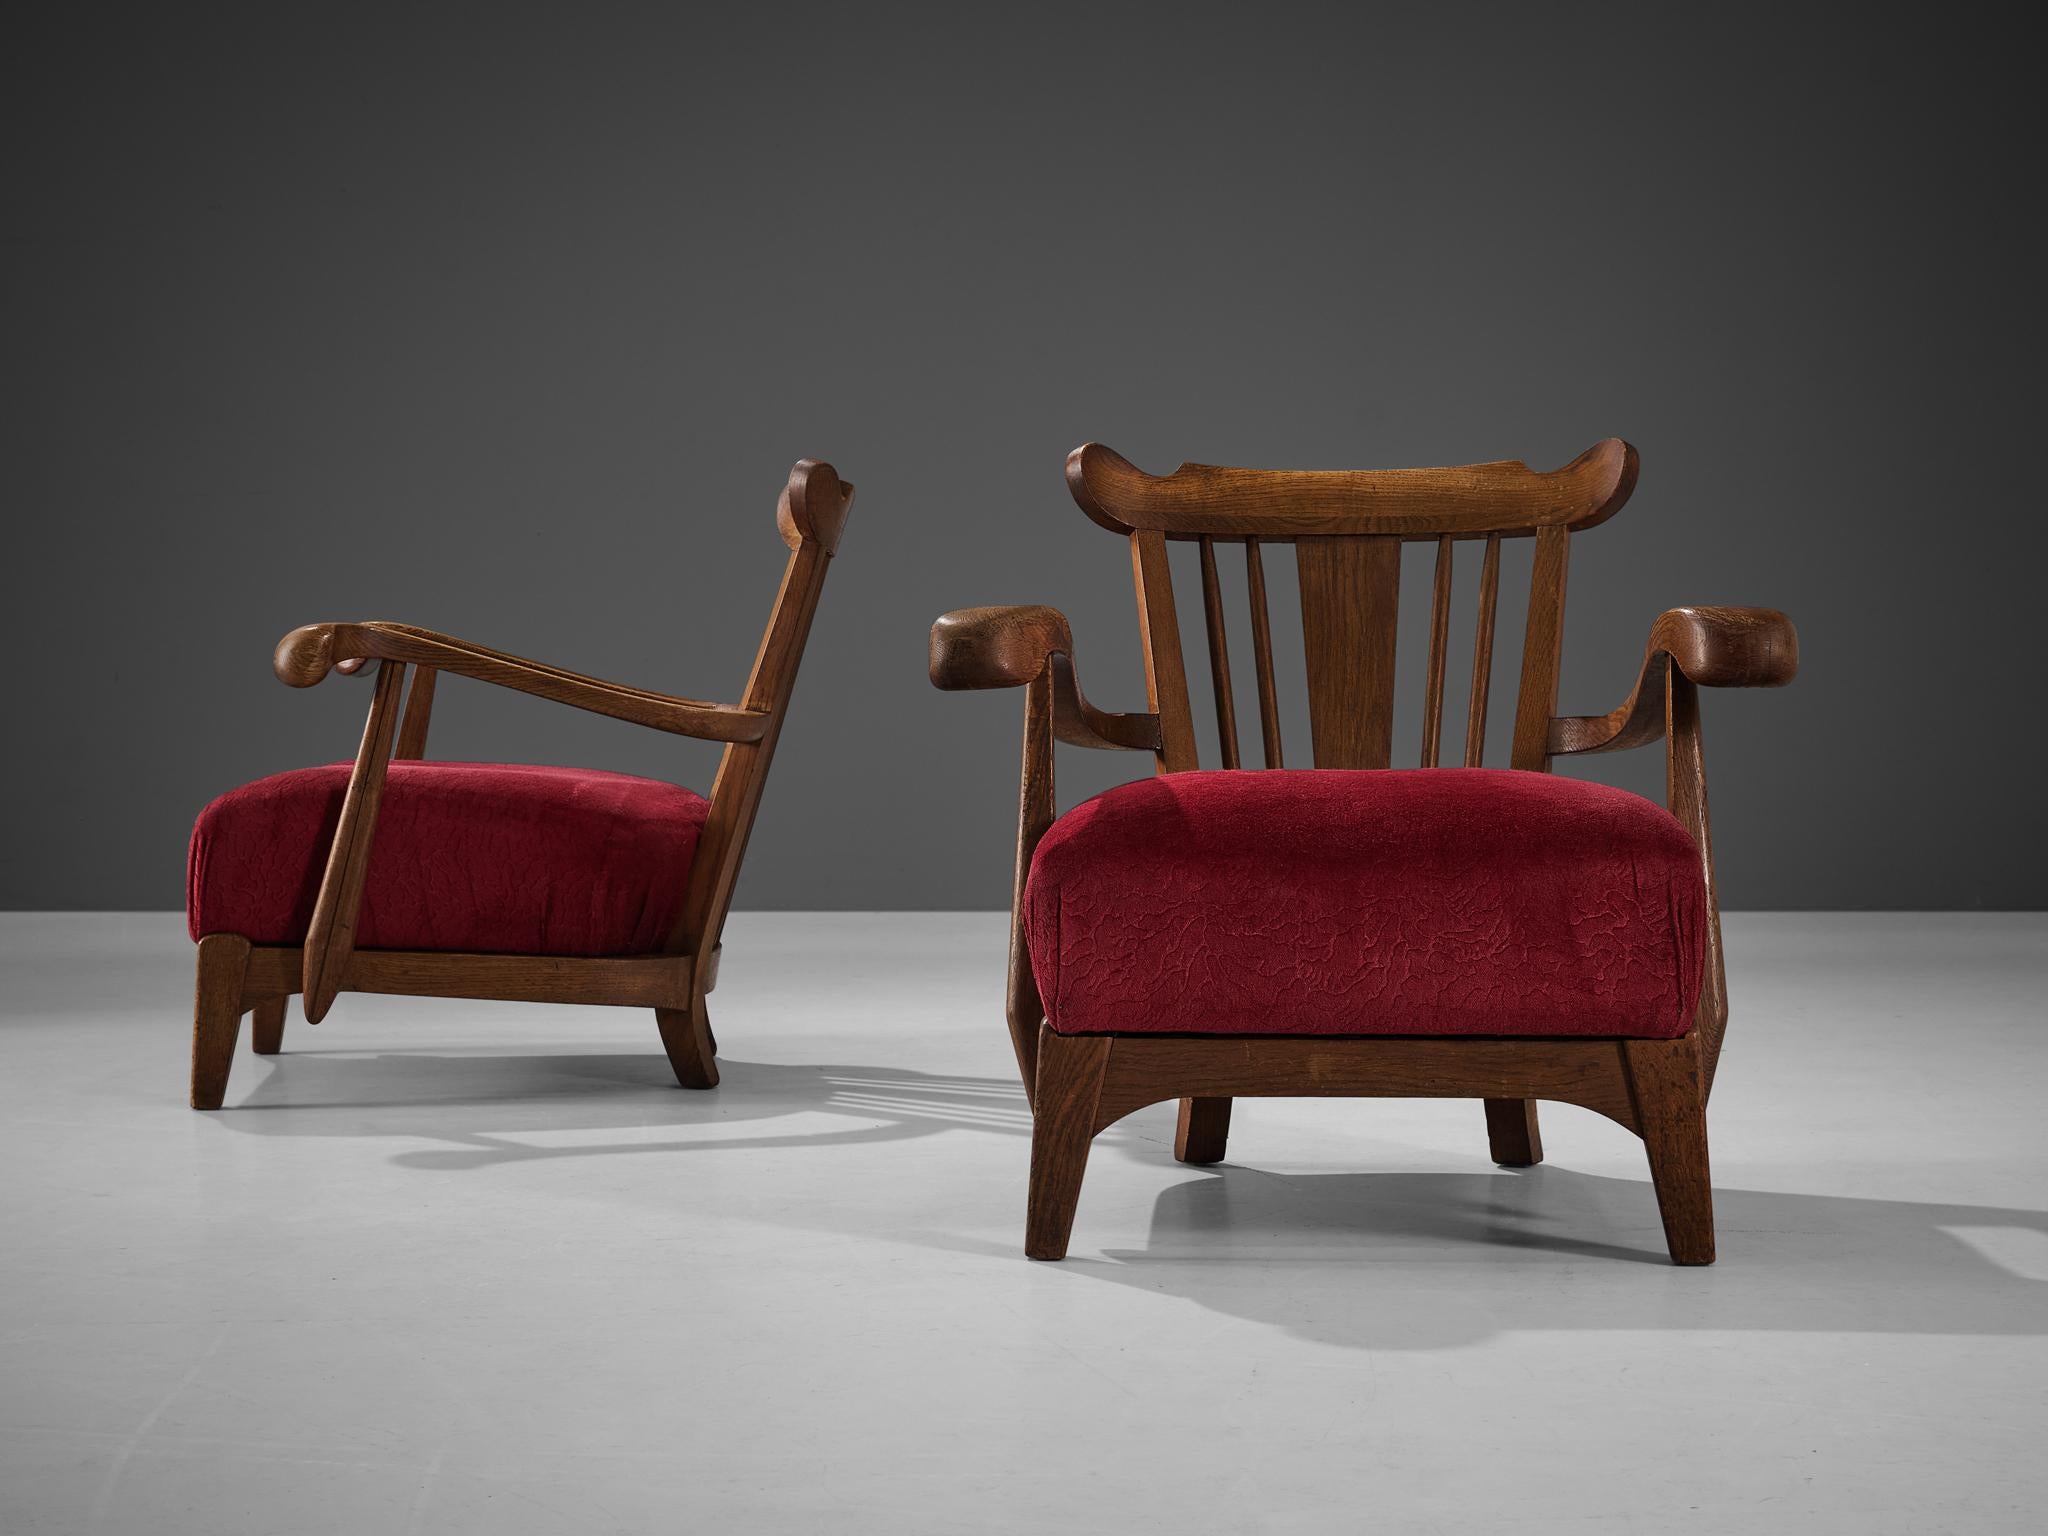 Sculpted French Pair of Armchairs in Oak and Burgundy Velvet Upholstery For Sale 1